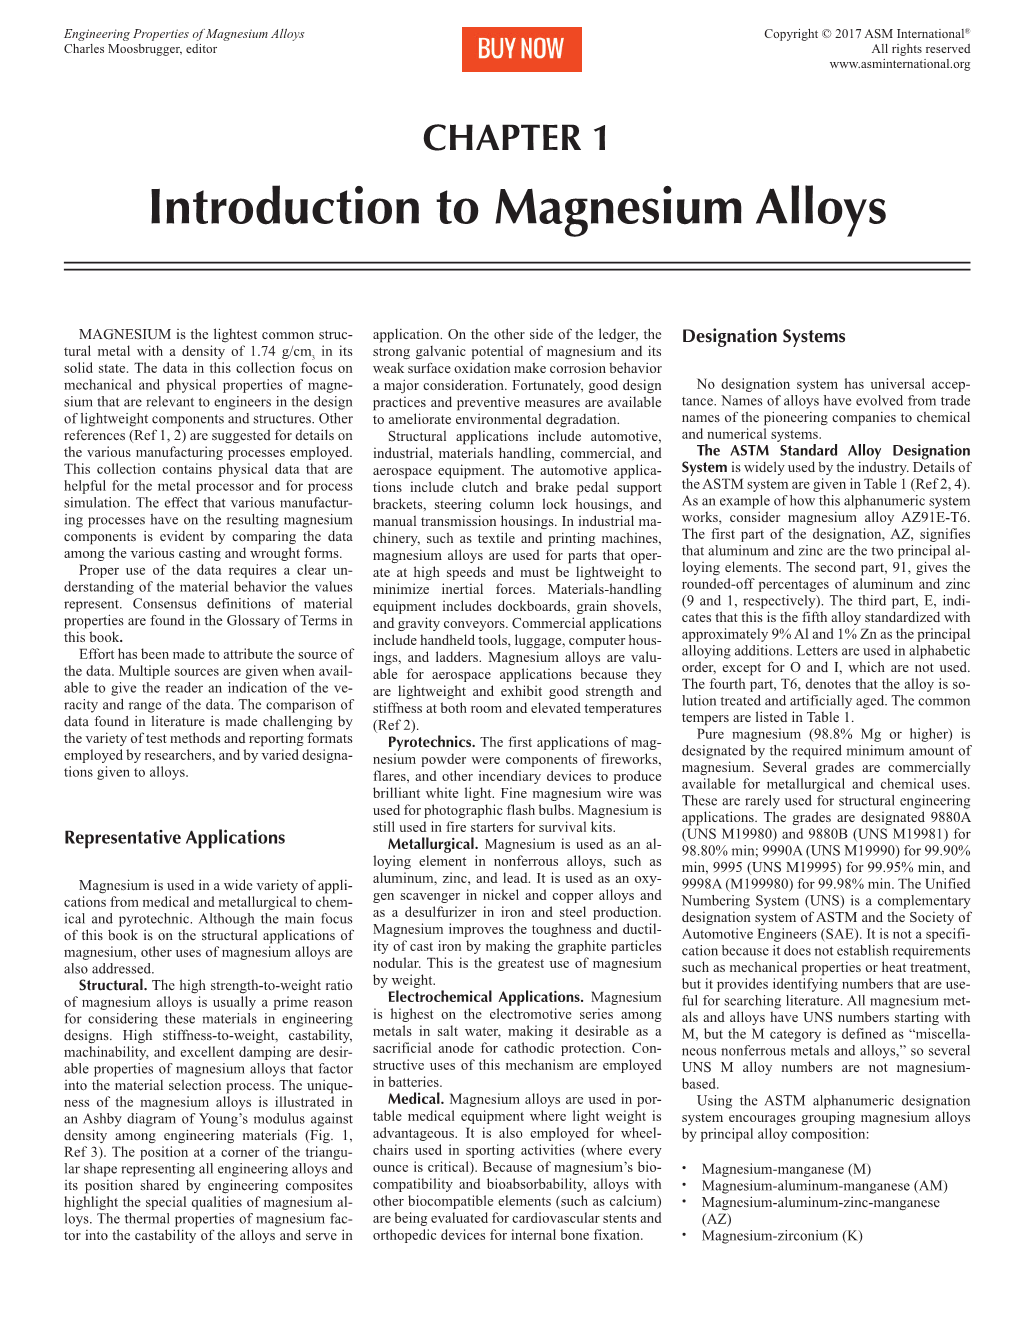 Introduction to Magnesium Alloys